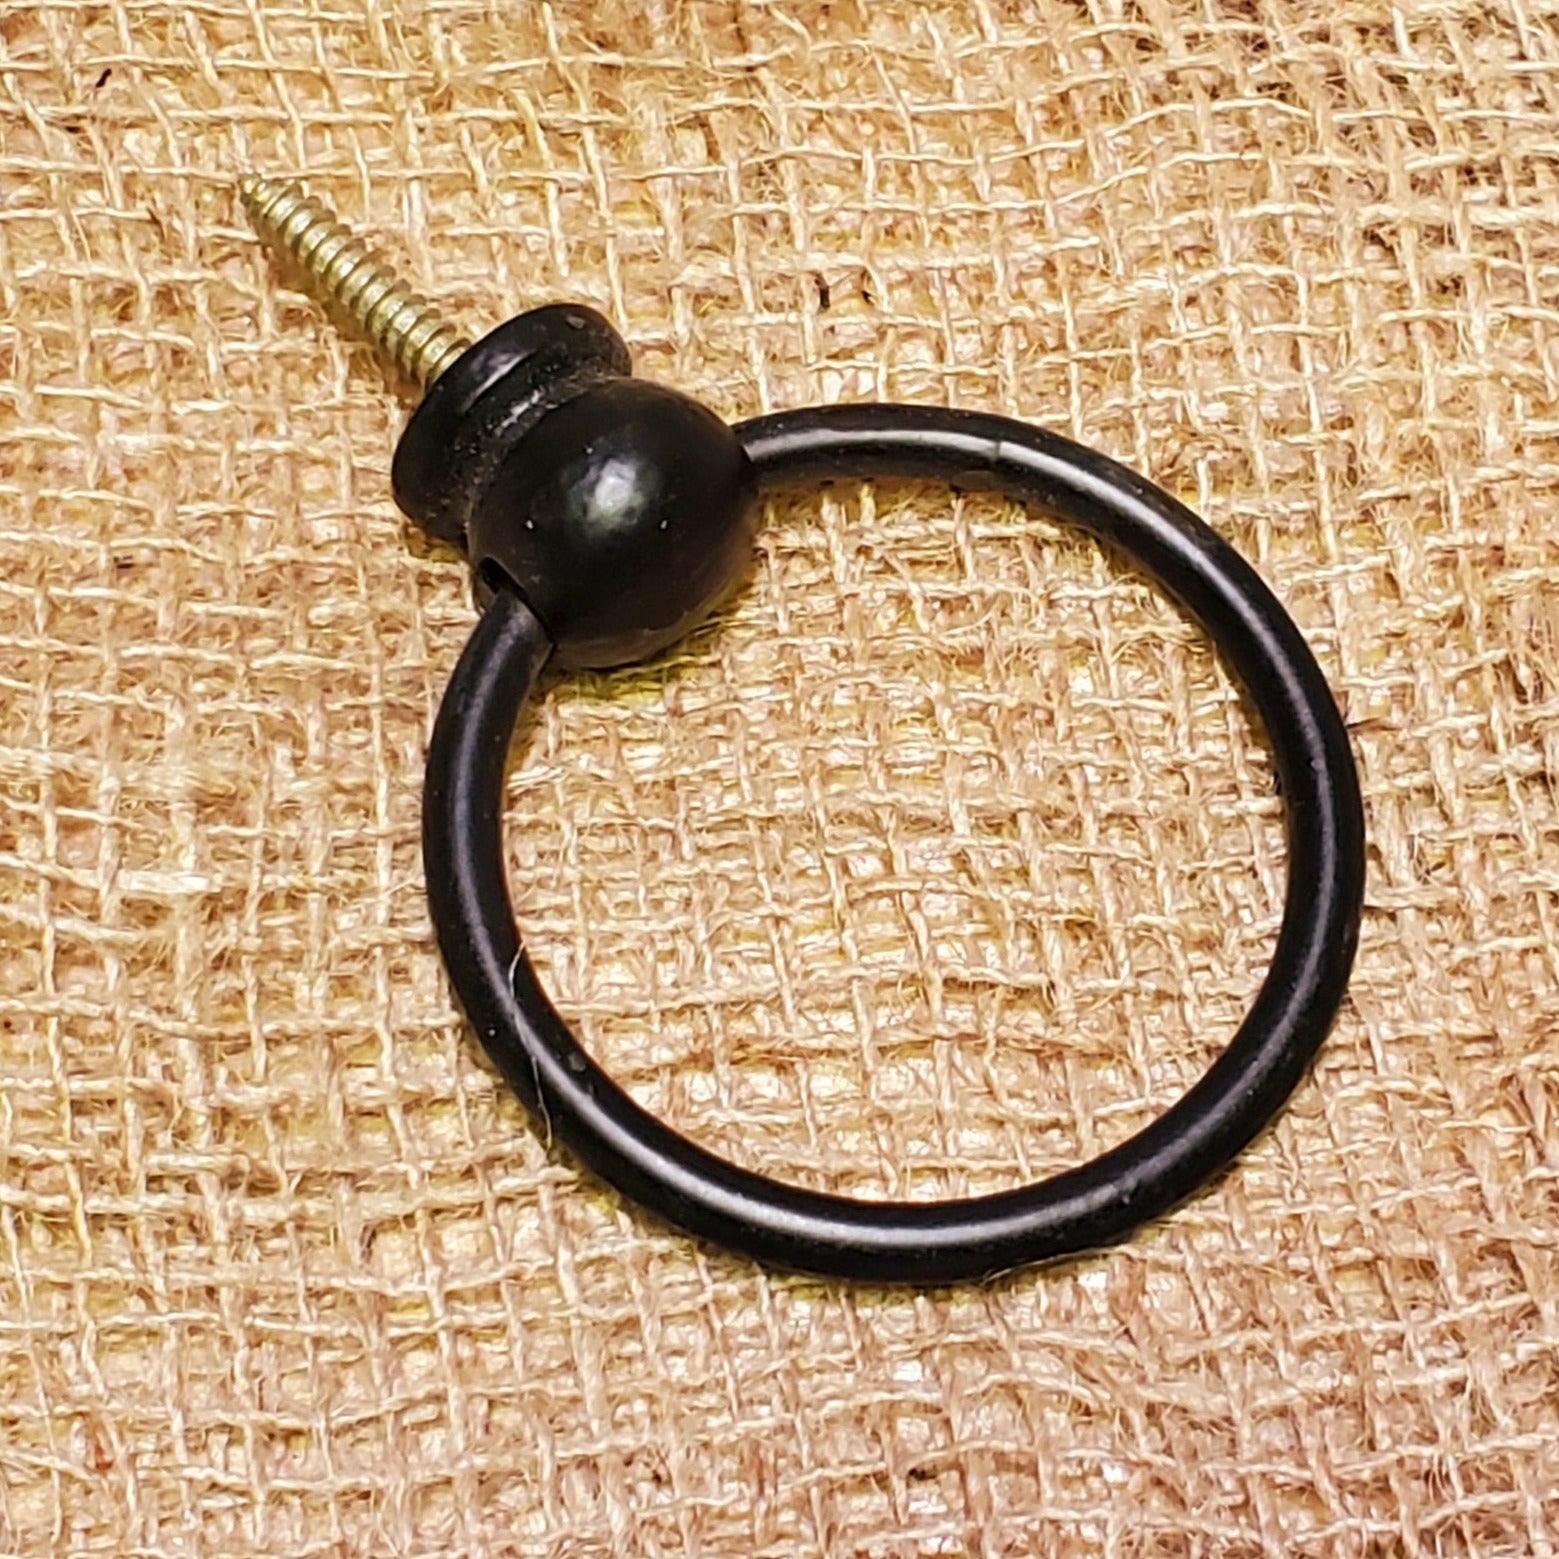 Ring Pull Handle 3" Satin Black - Spearhead Collection - Rails & Rings - Barn Restoration, Hardware, Lifting Handles, Rails & Rings, Rings, Satin Black Finish